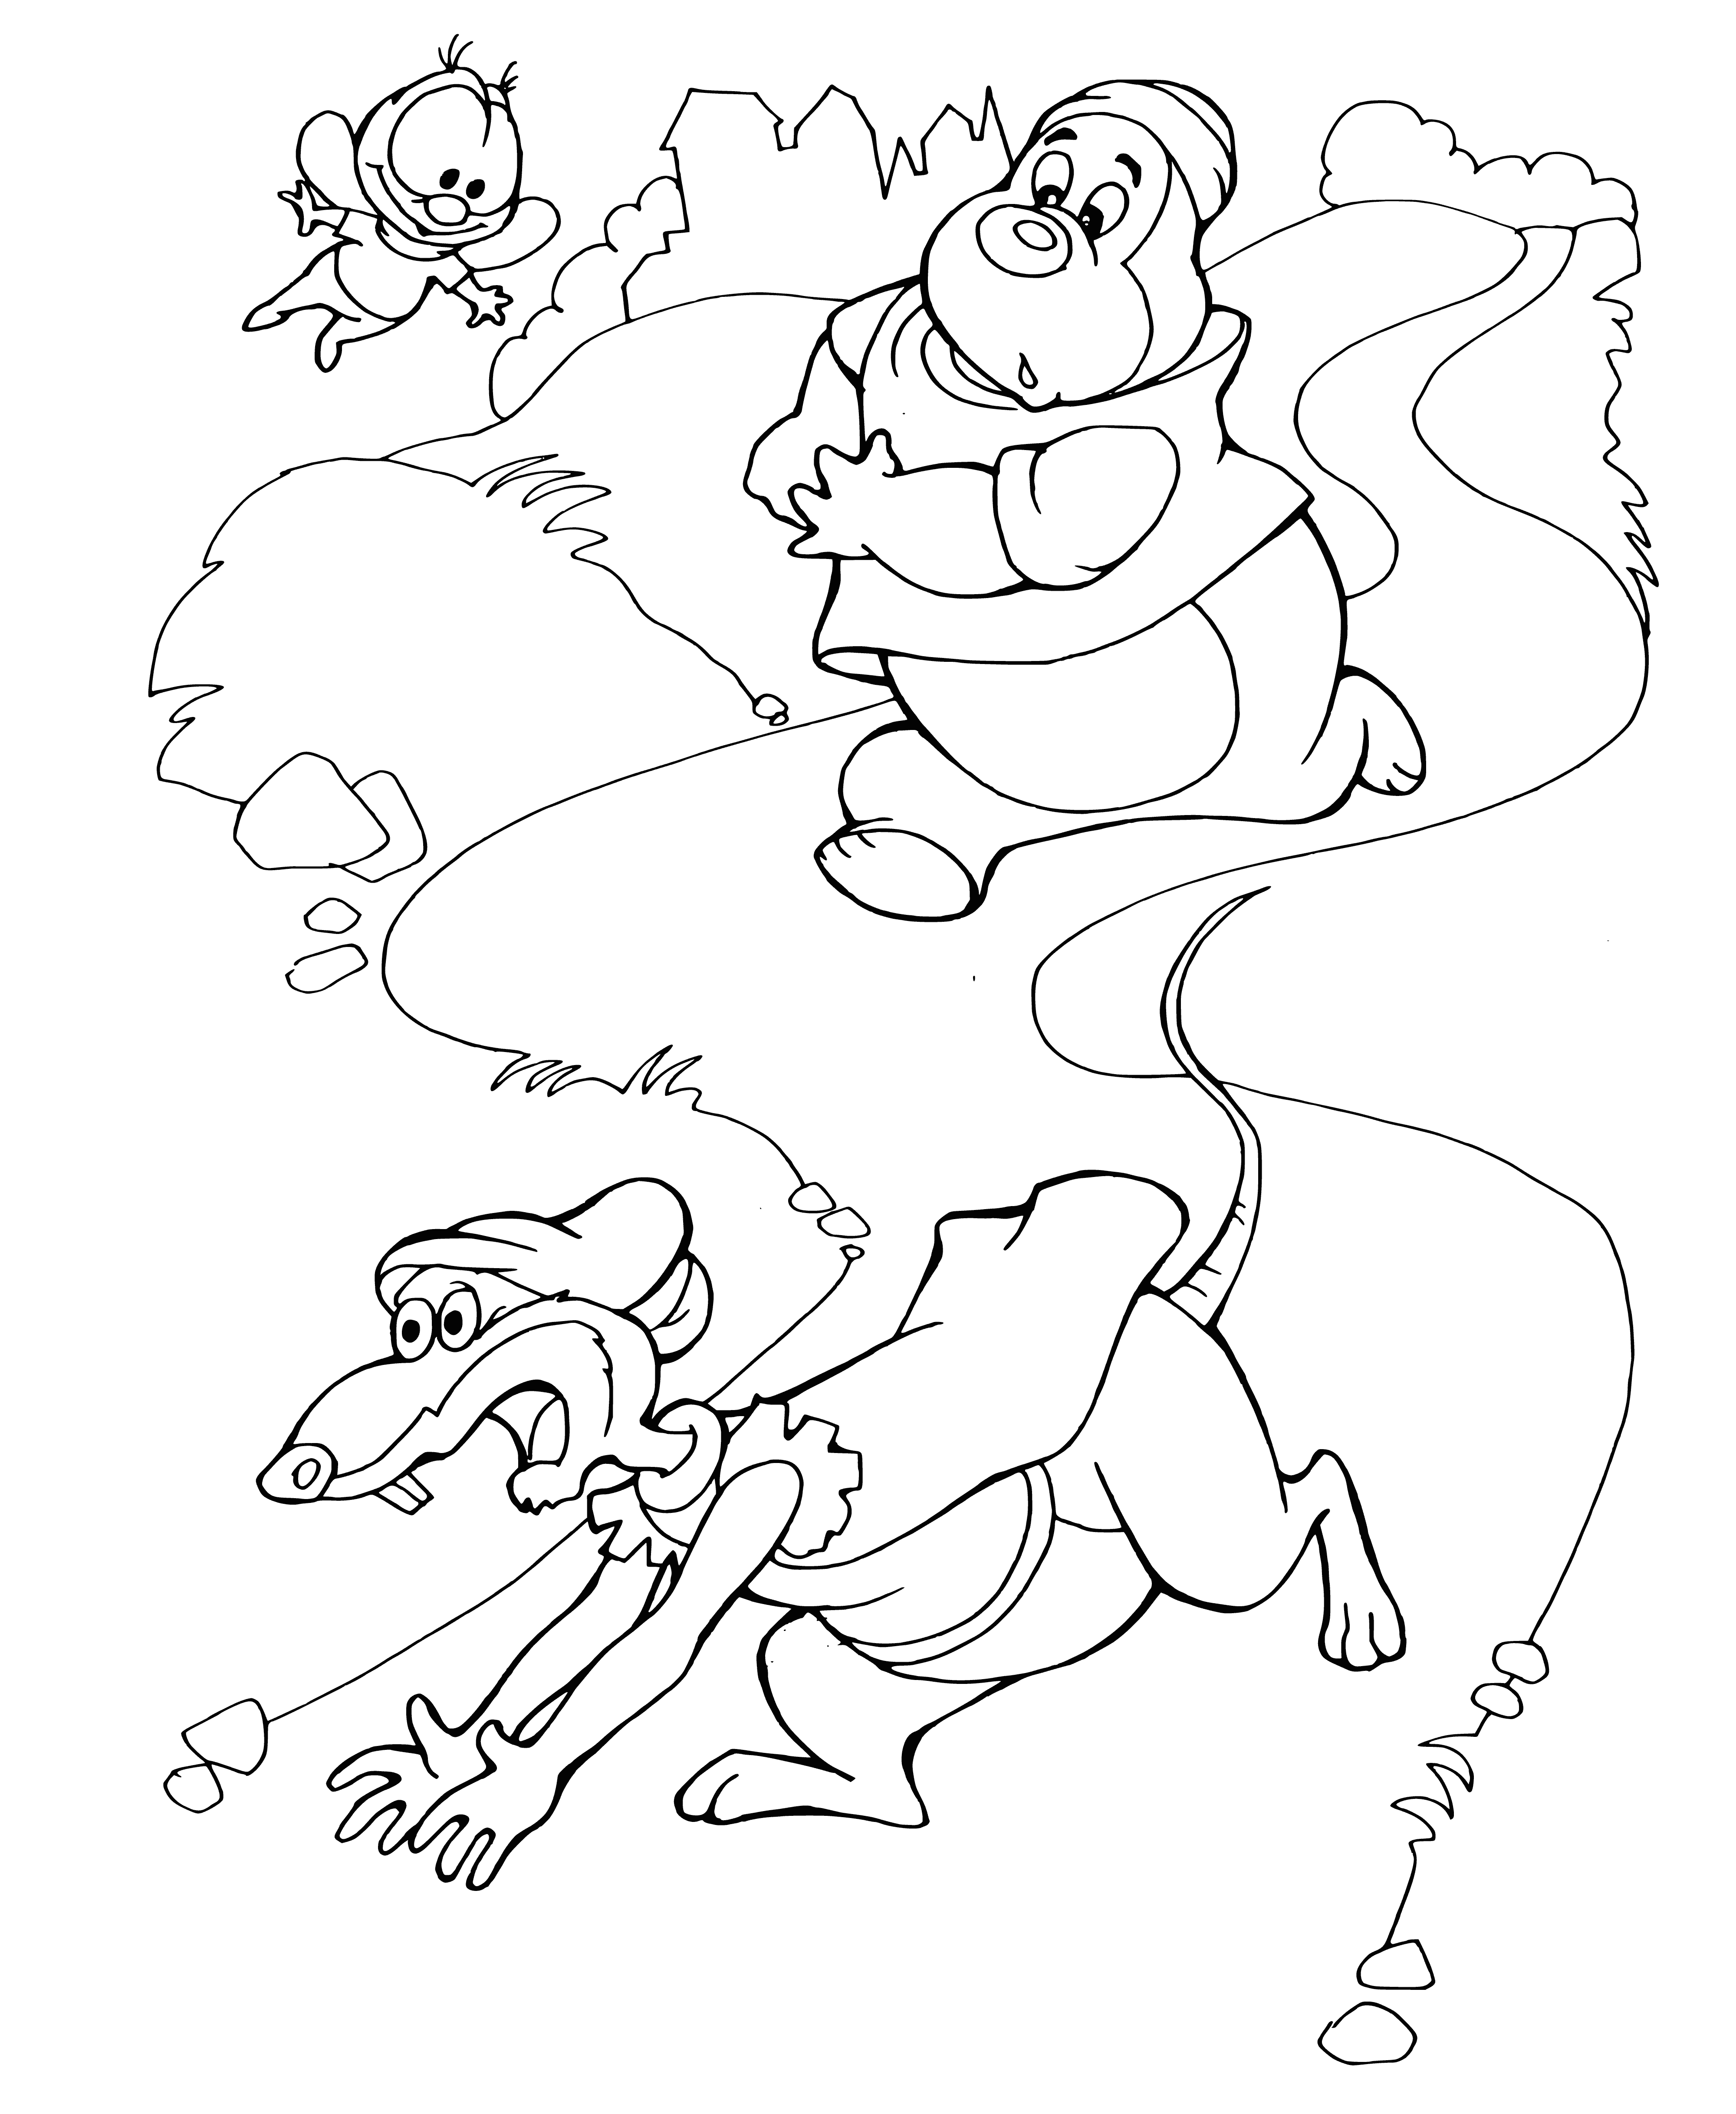 Fat Cat's henchmen coloring page